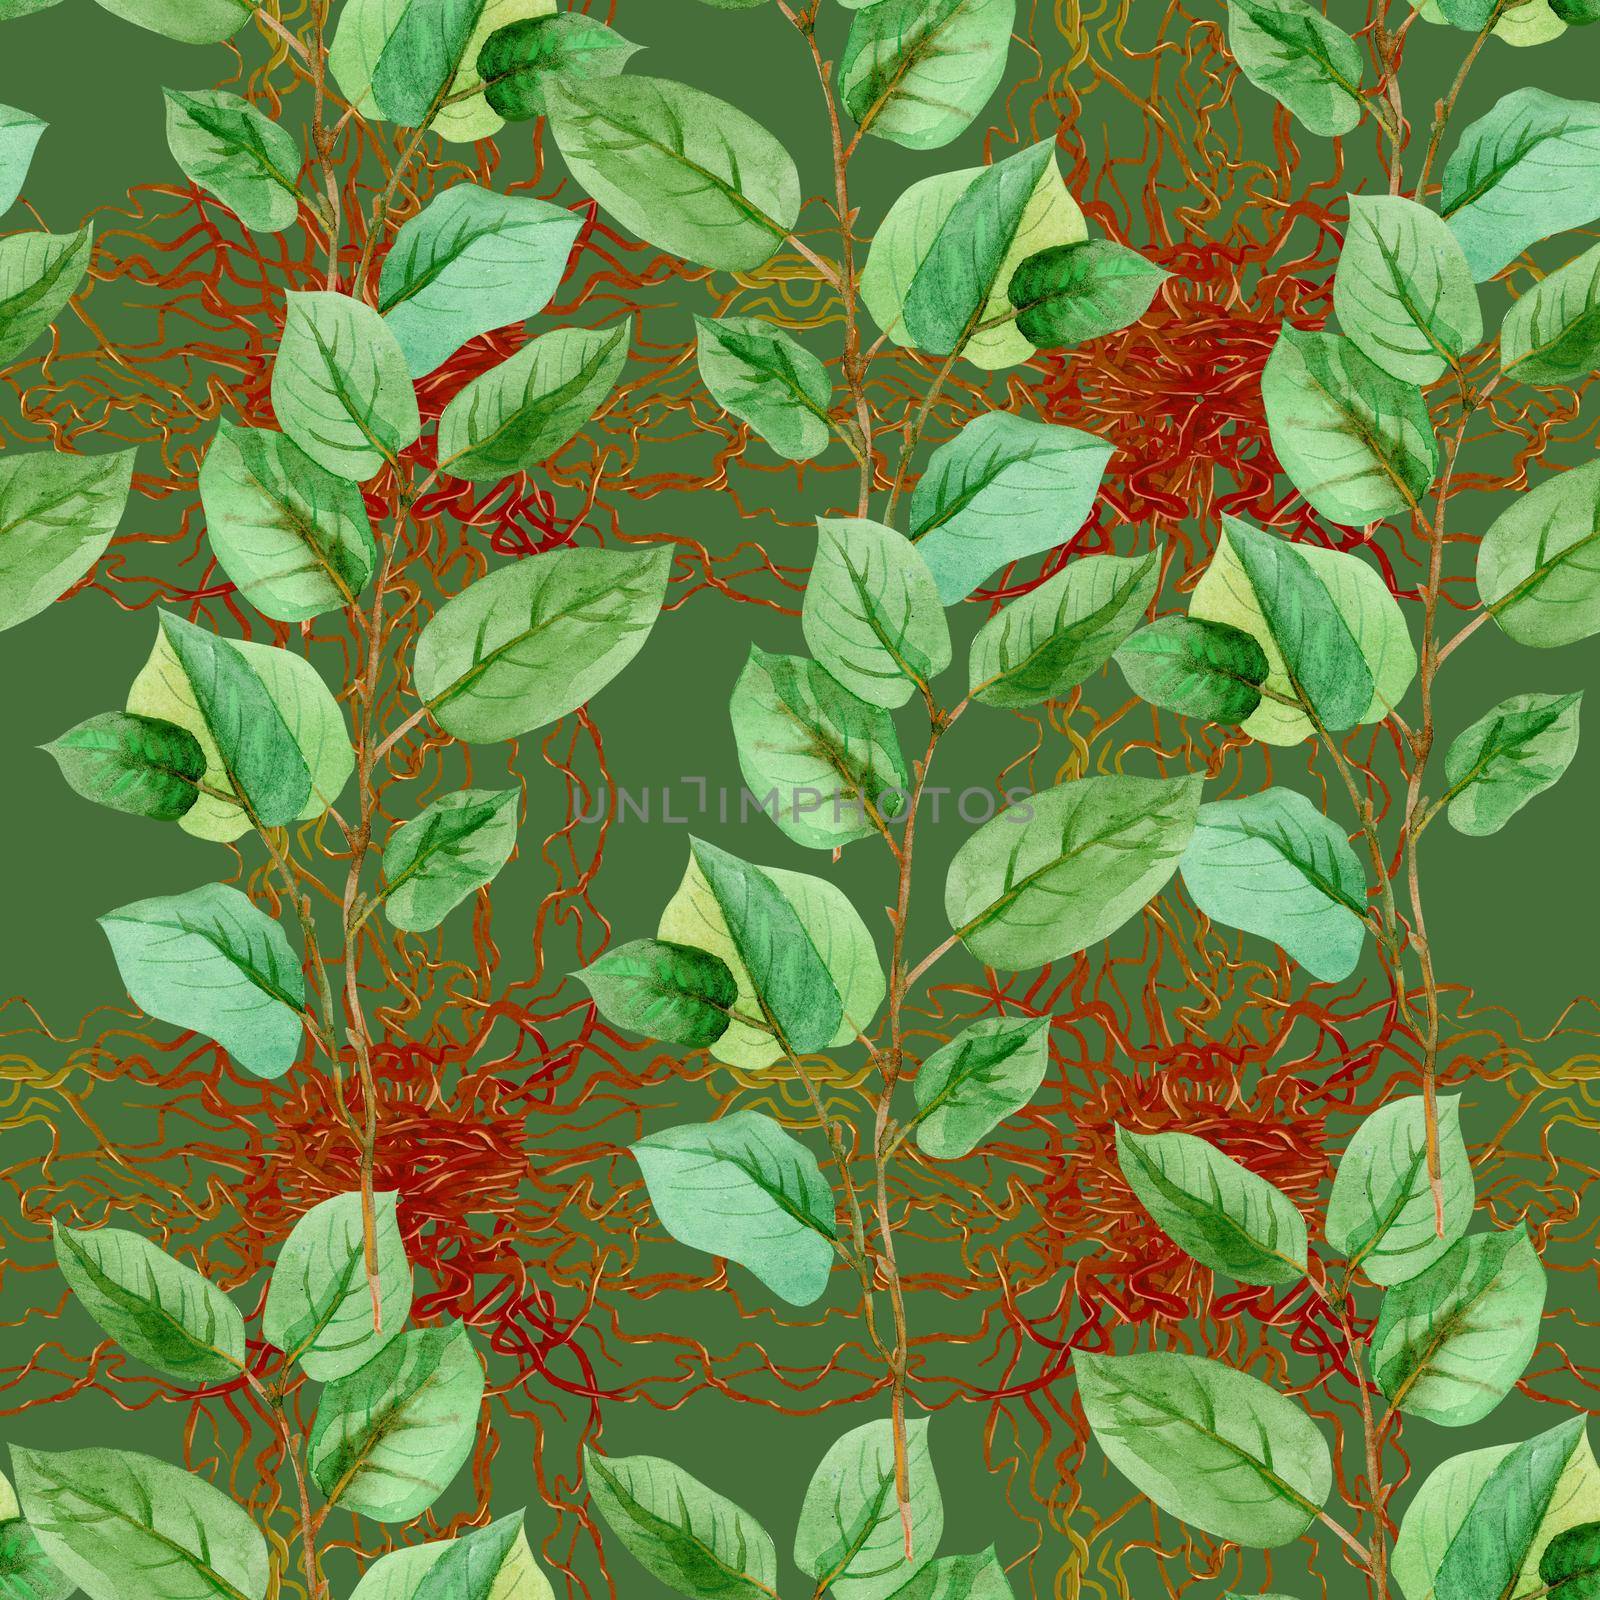 Floral leaves seamless pattern green color on a green background. Artistic design for floral print for packaging, textile, wallpaper, gift wrap, greeting or wedding background.